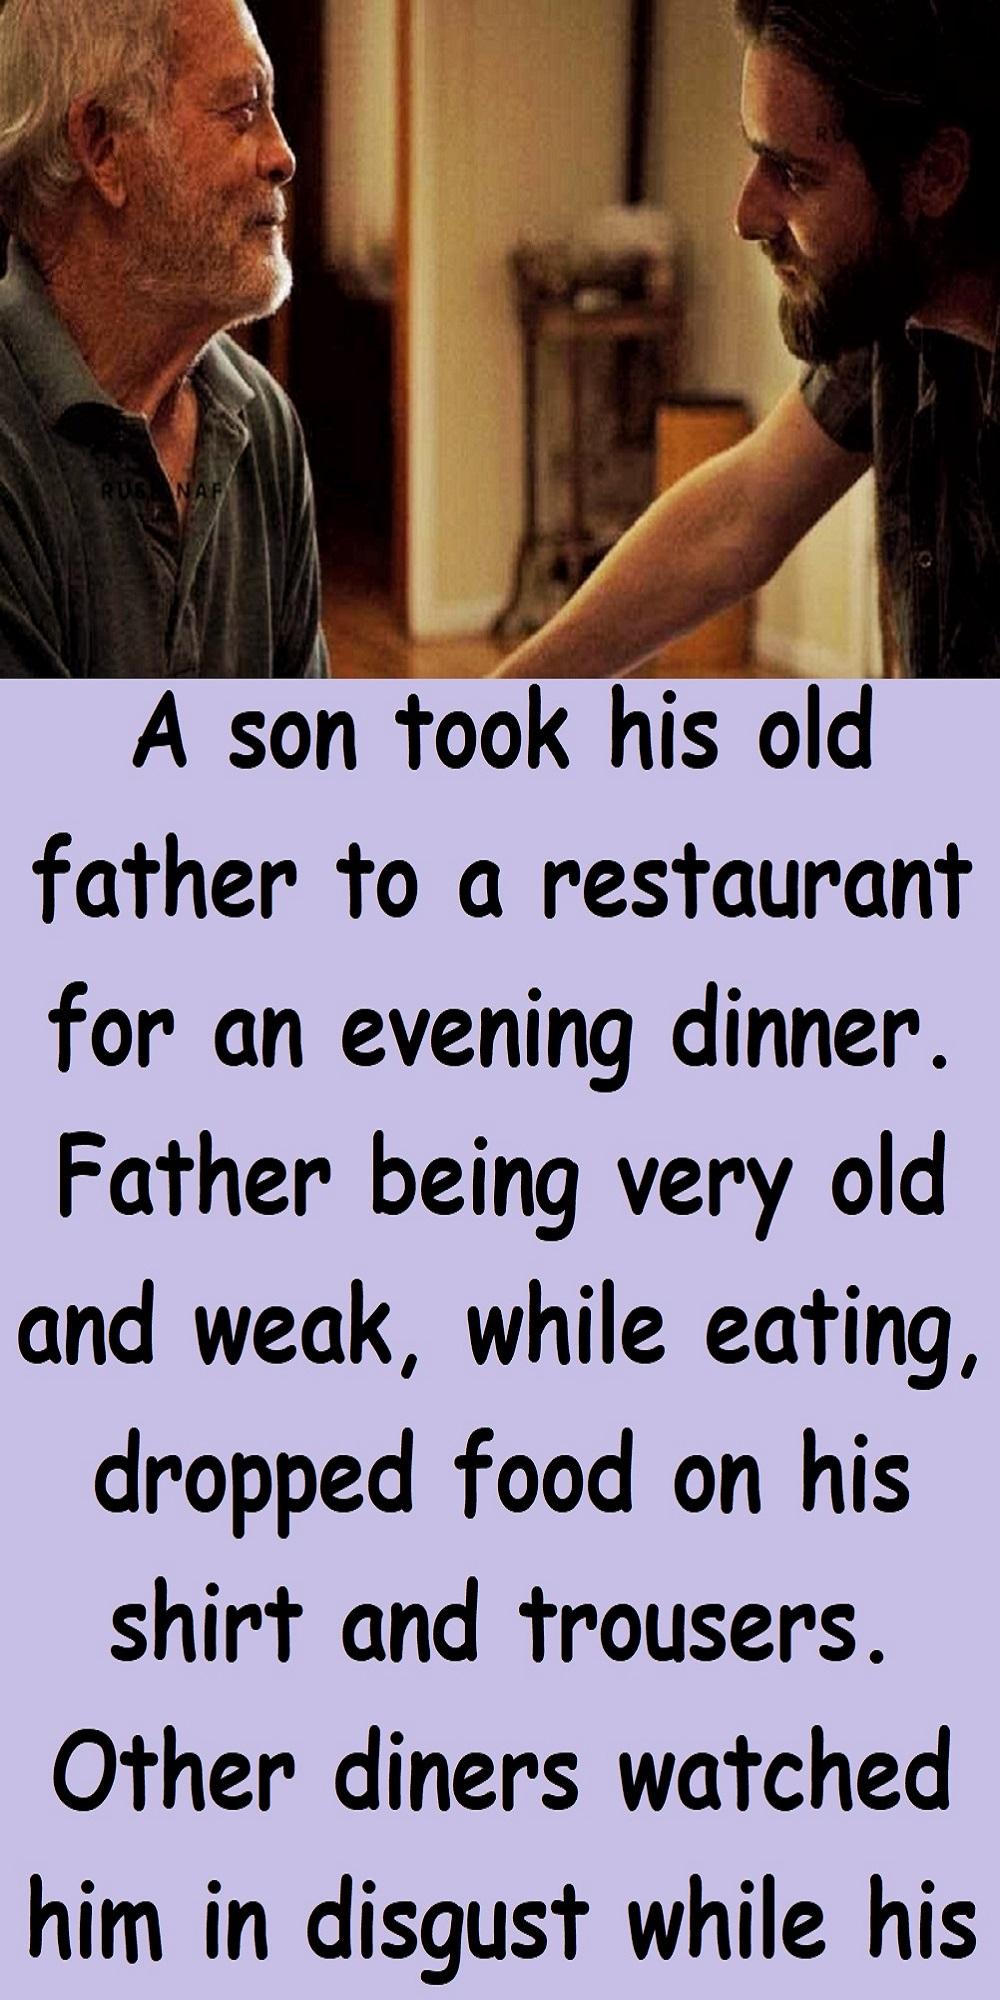 Moral Story Evening Dinner With a Father p - Moral Story